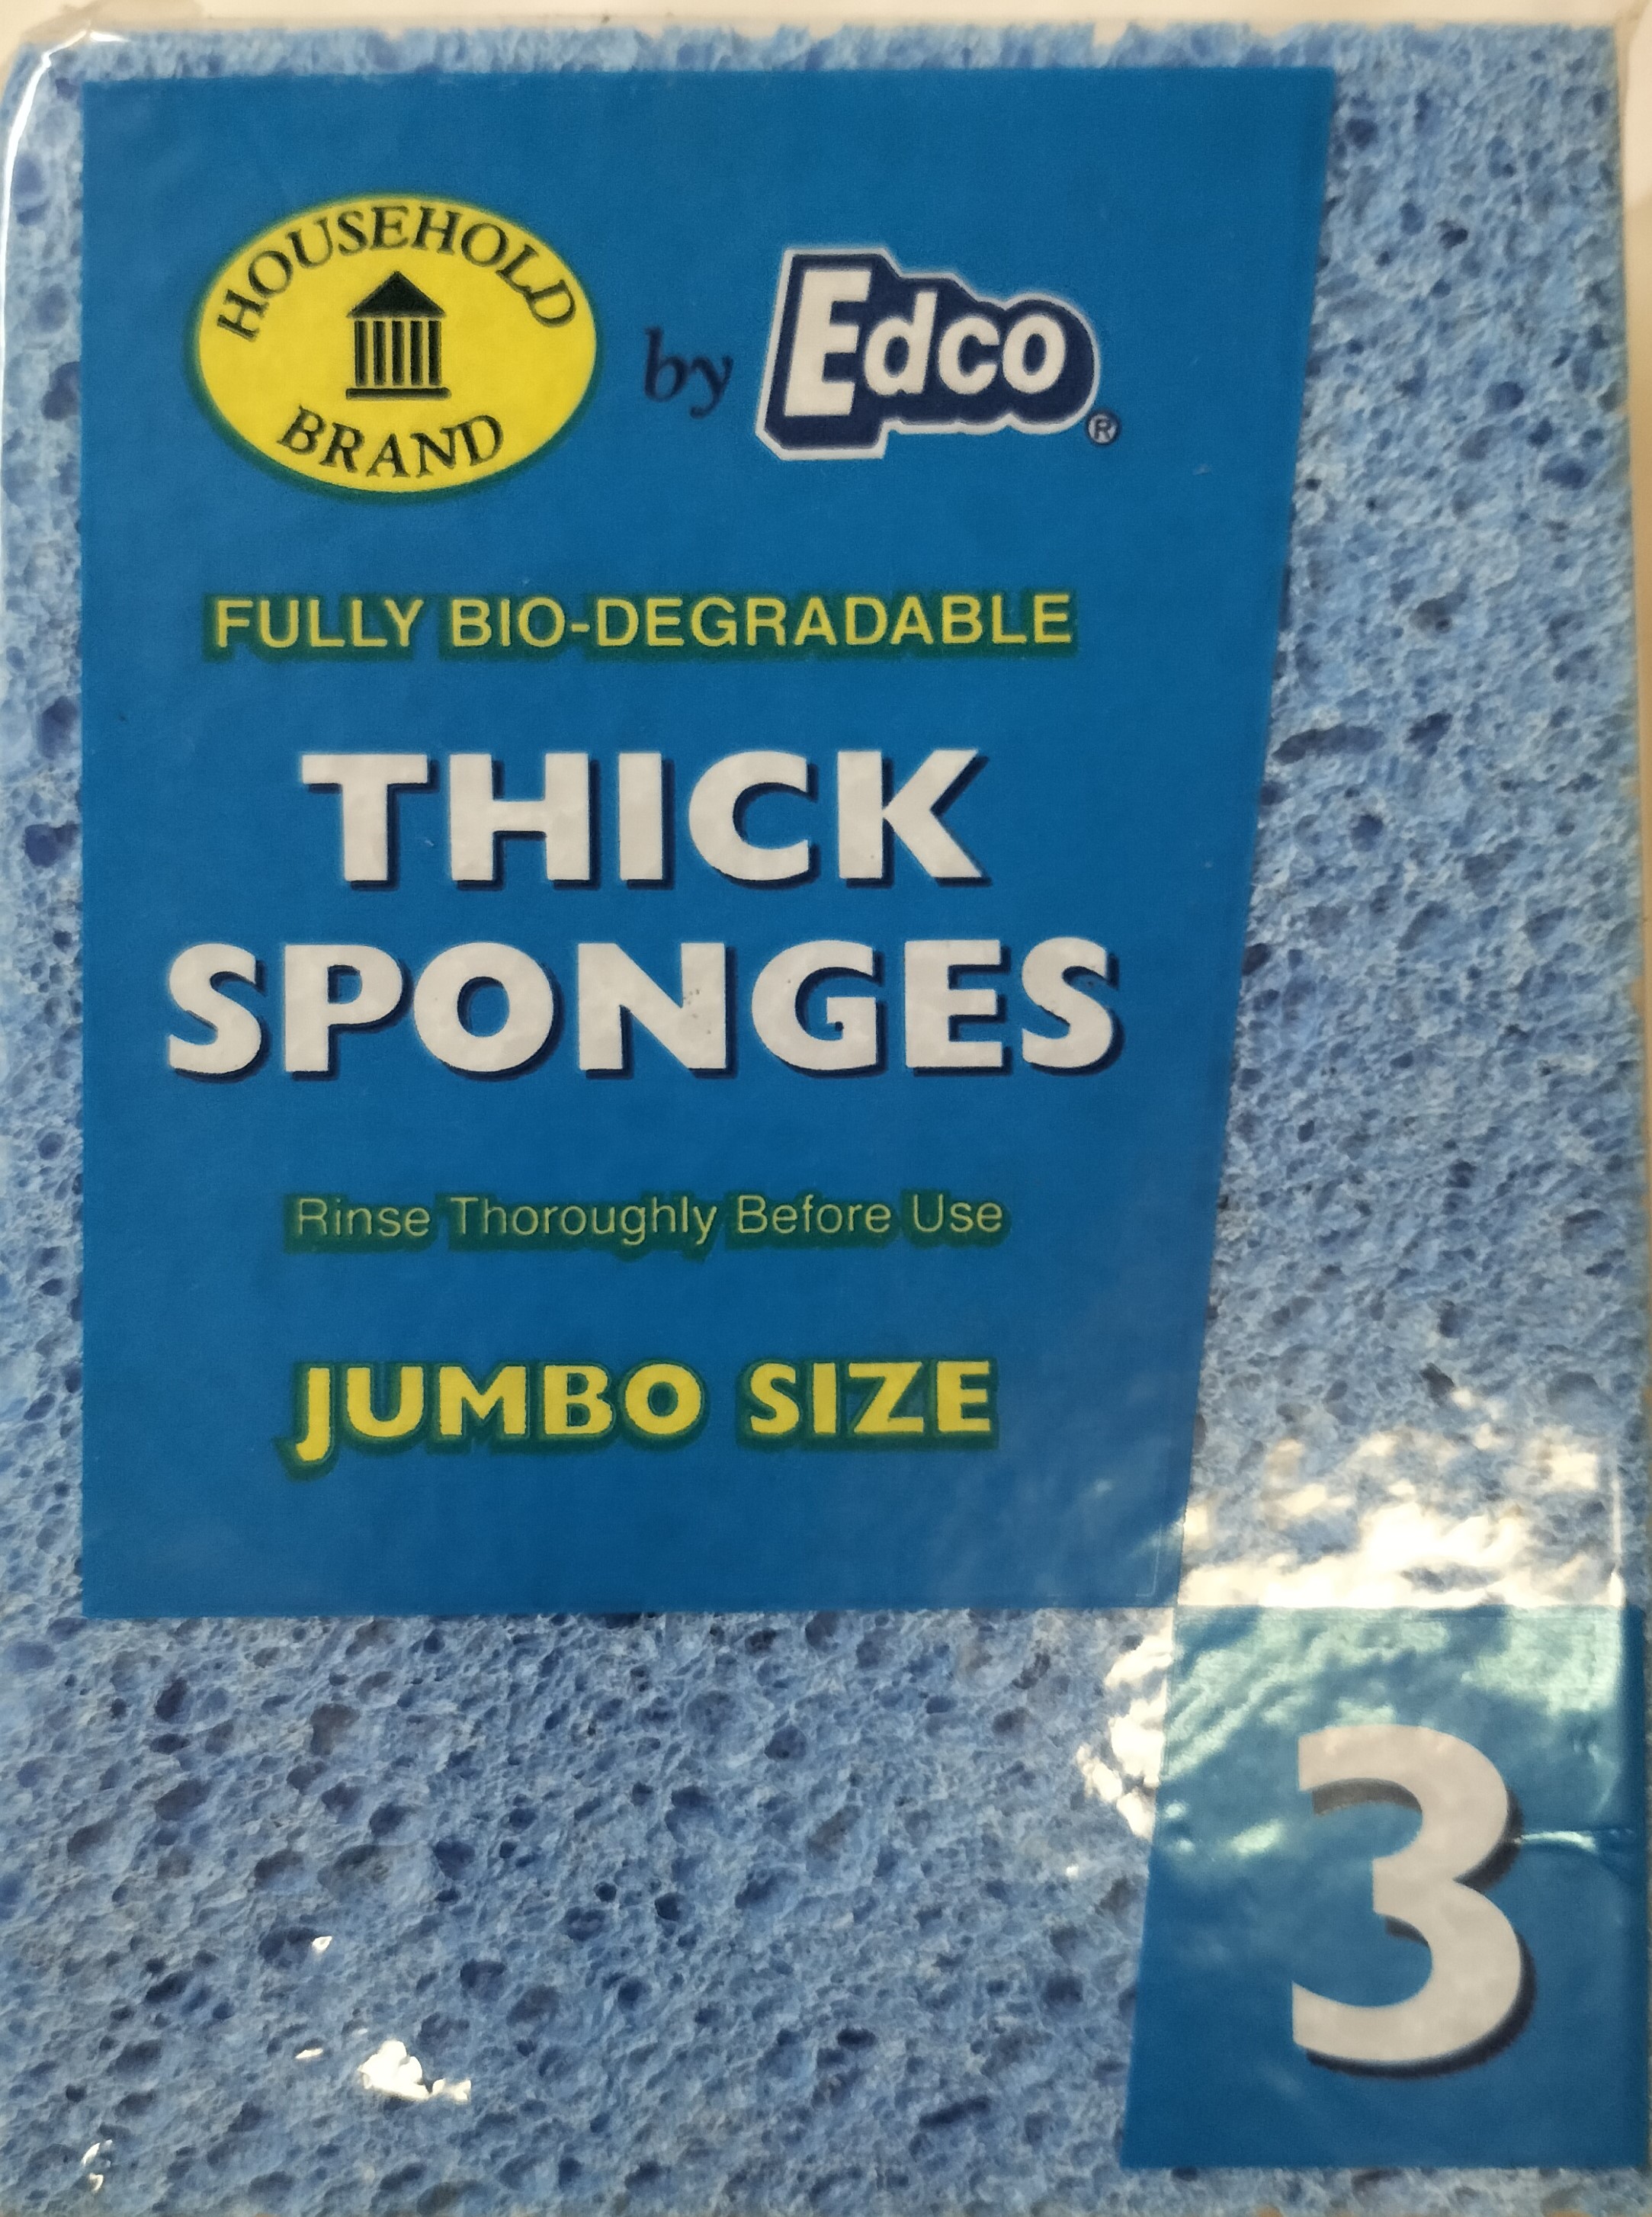 Edco Thick Sponges 160x120x13mm Pack of 3 Blue